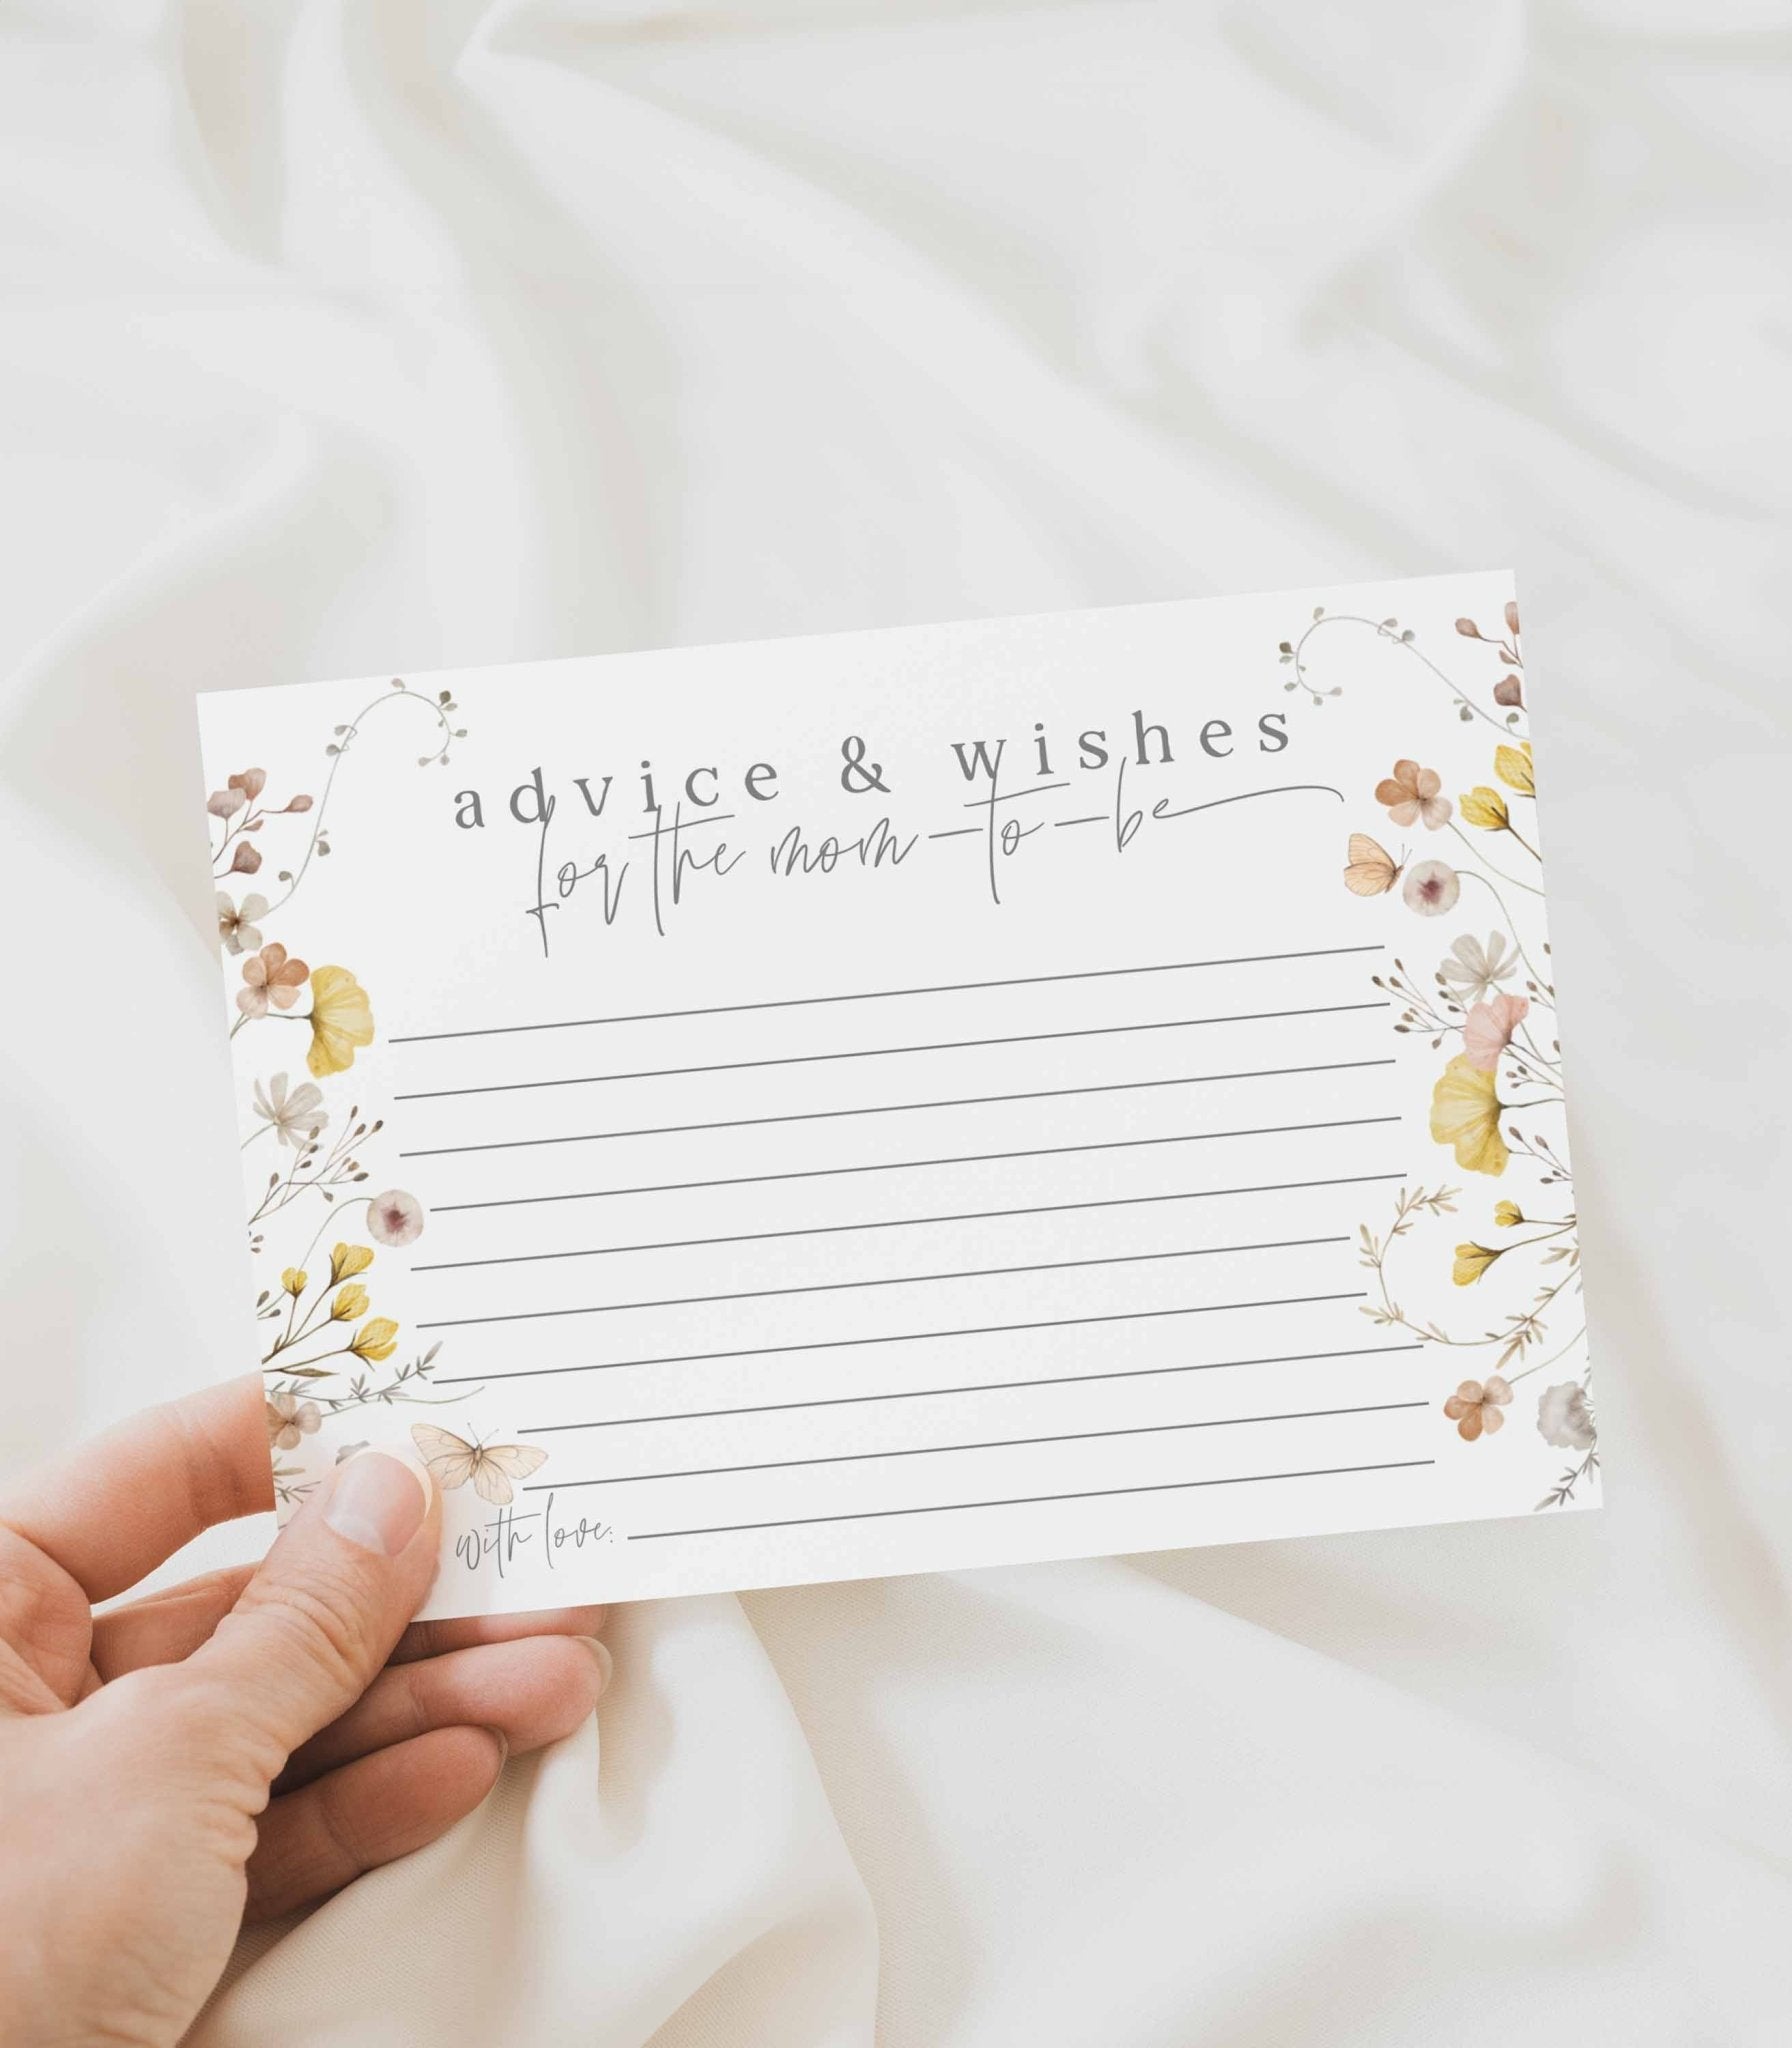 Wildflower Advice for the Mom-To-Be Sign and Note Cards - High Peaks Studios